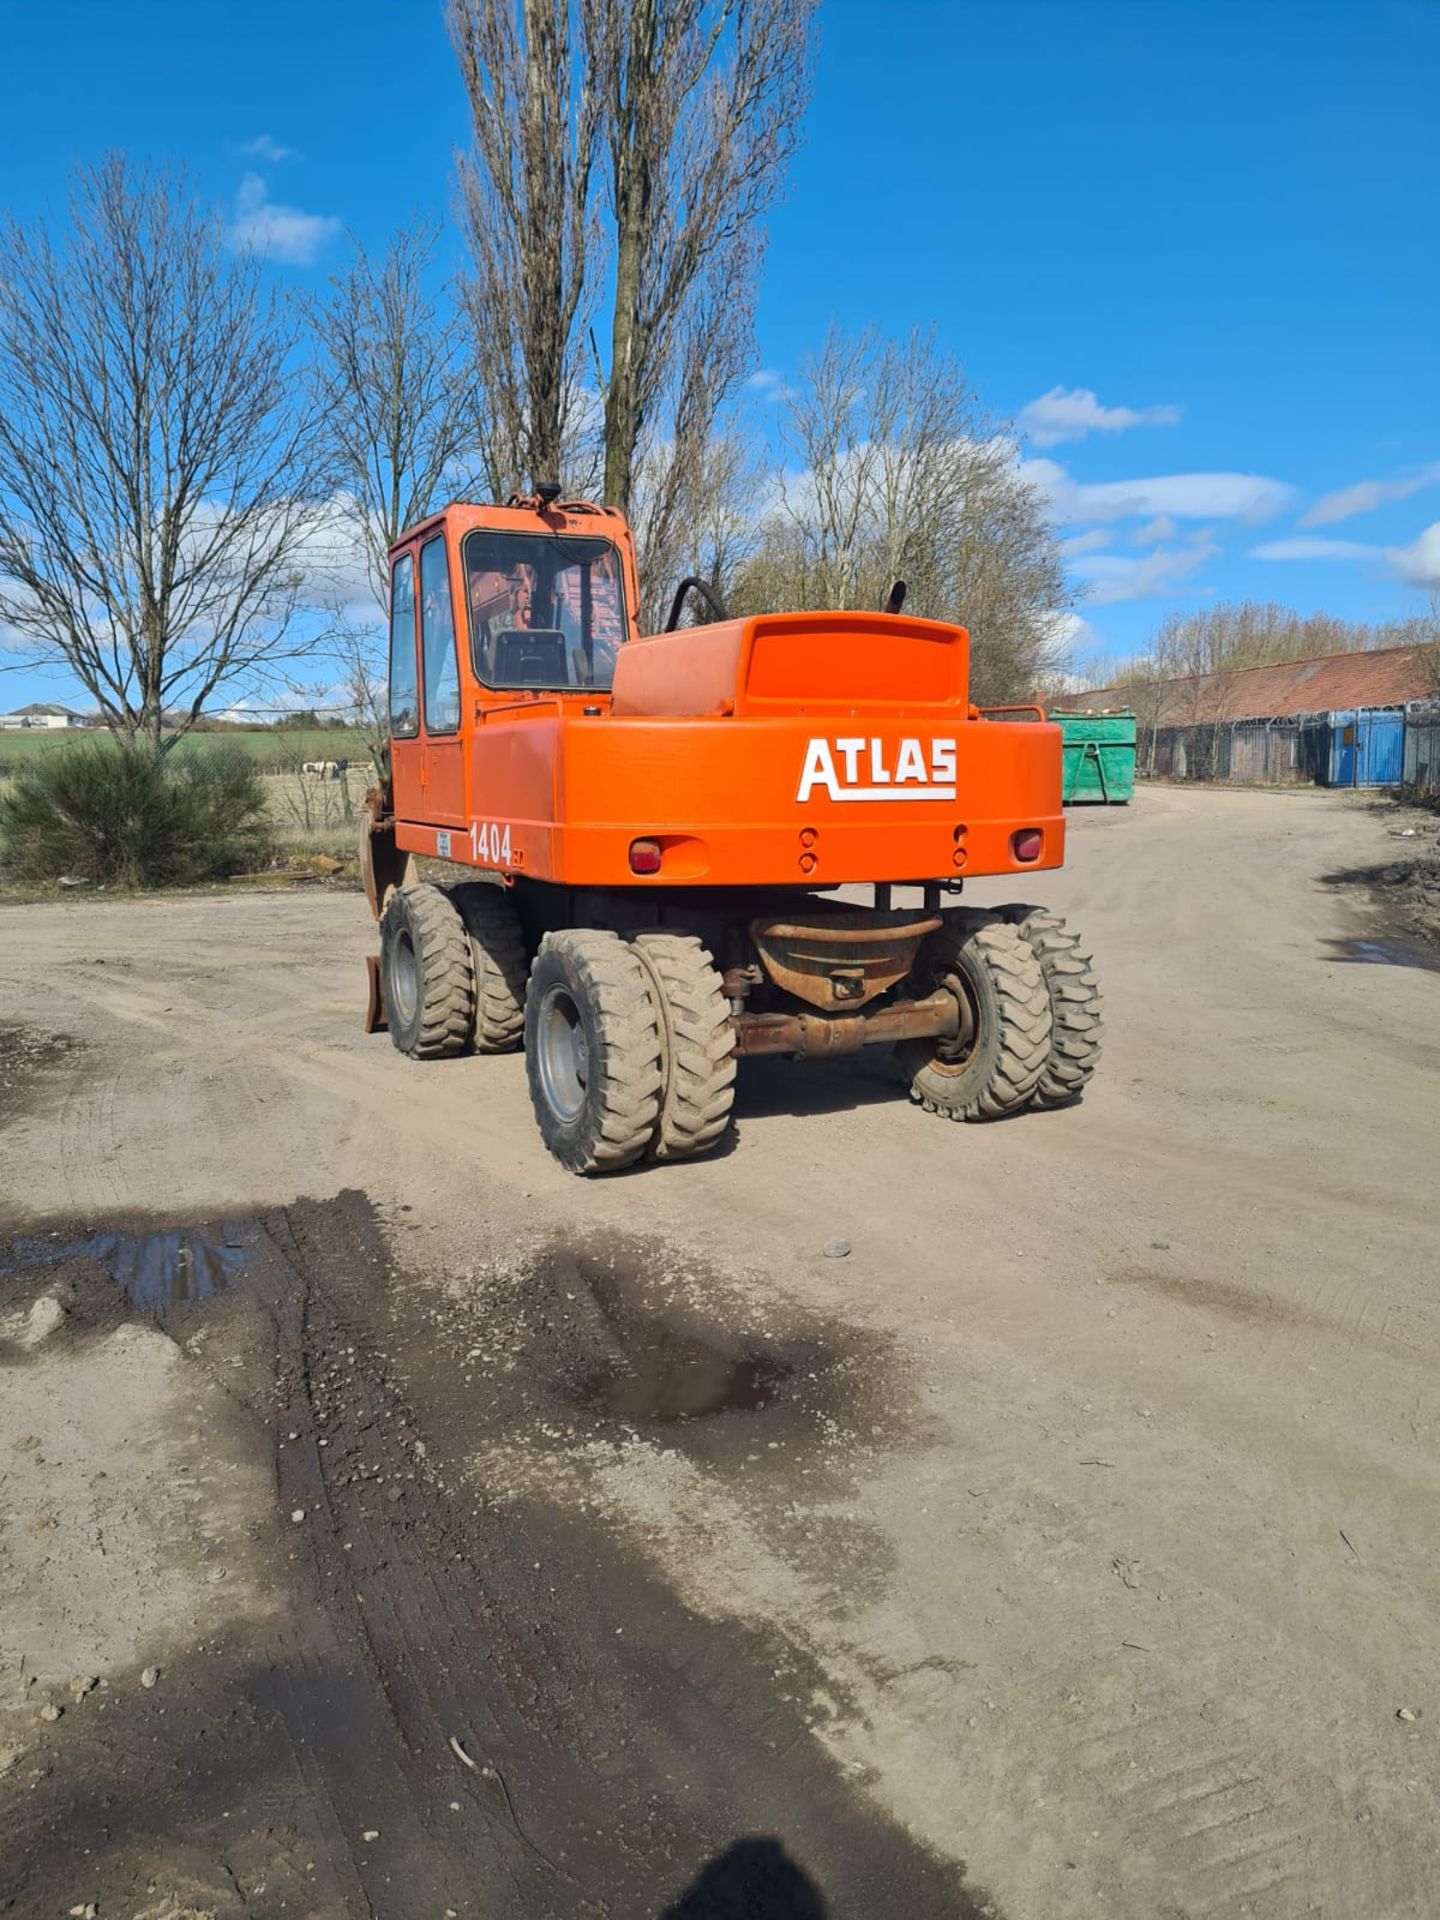 Atlas Rubber tyre excavator 16 ton 4 Cylinder deutz engine with front blad 10426 hours 4wd year 1993 - Image 2 of 14